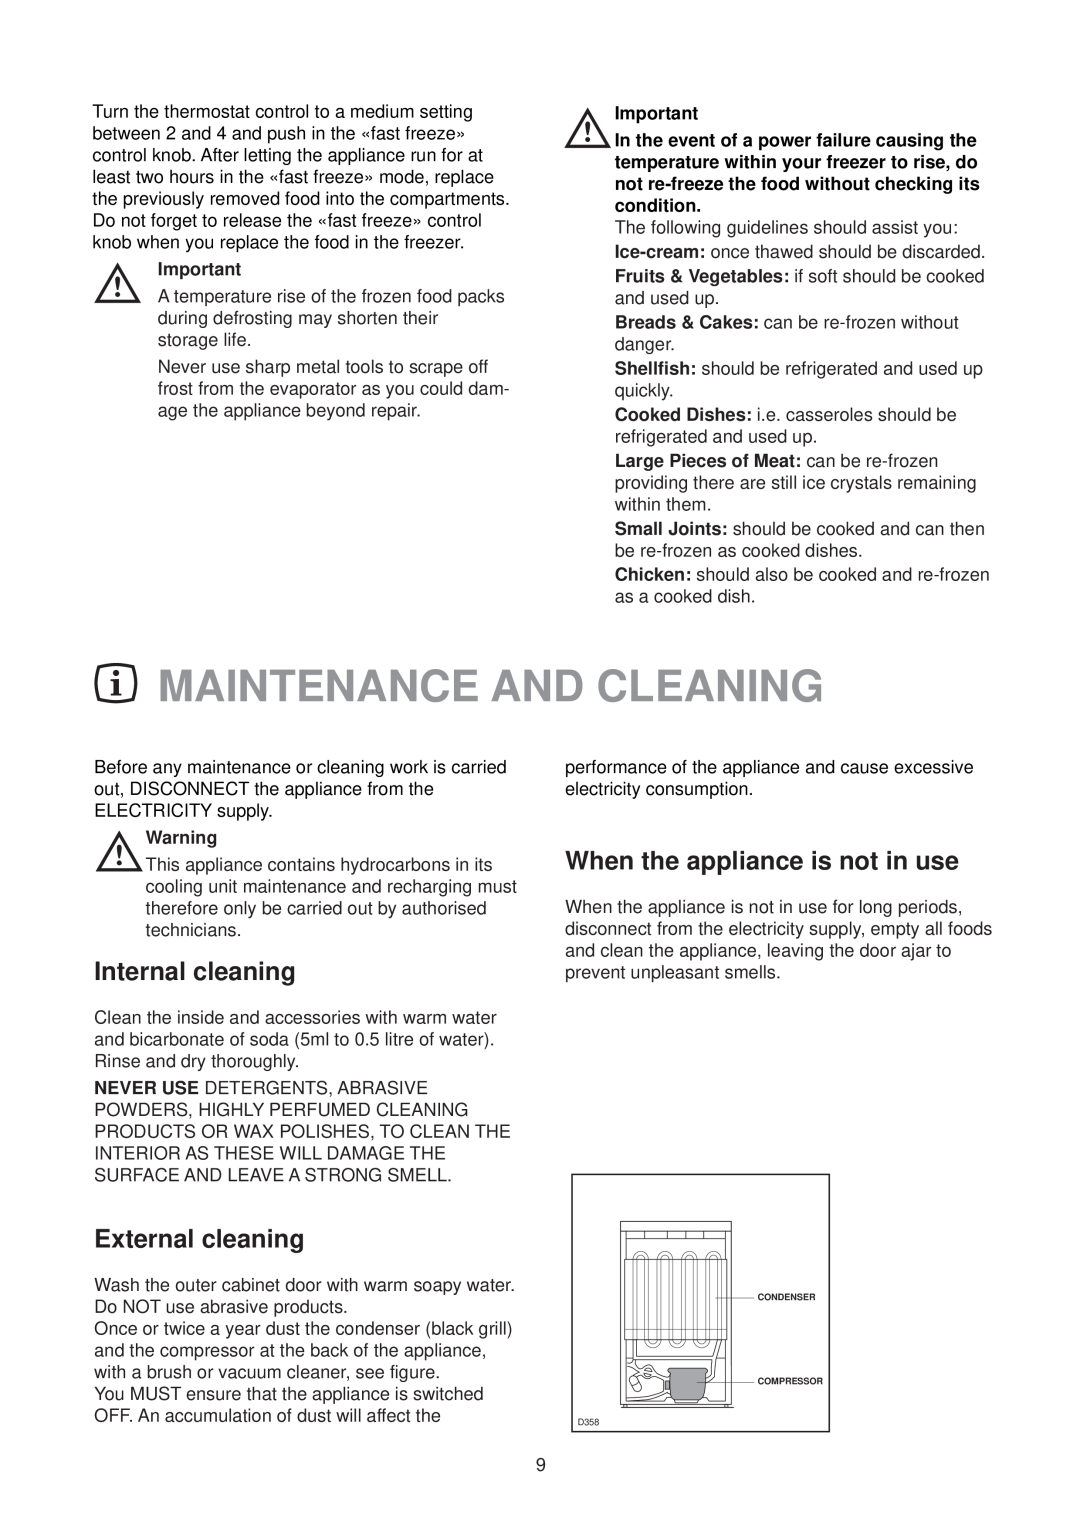 Zanussi ZVR 47 R manual Maintenance And Cleaning, Internal cleaning, External cleaning, When the appliance is not in use 